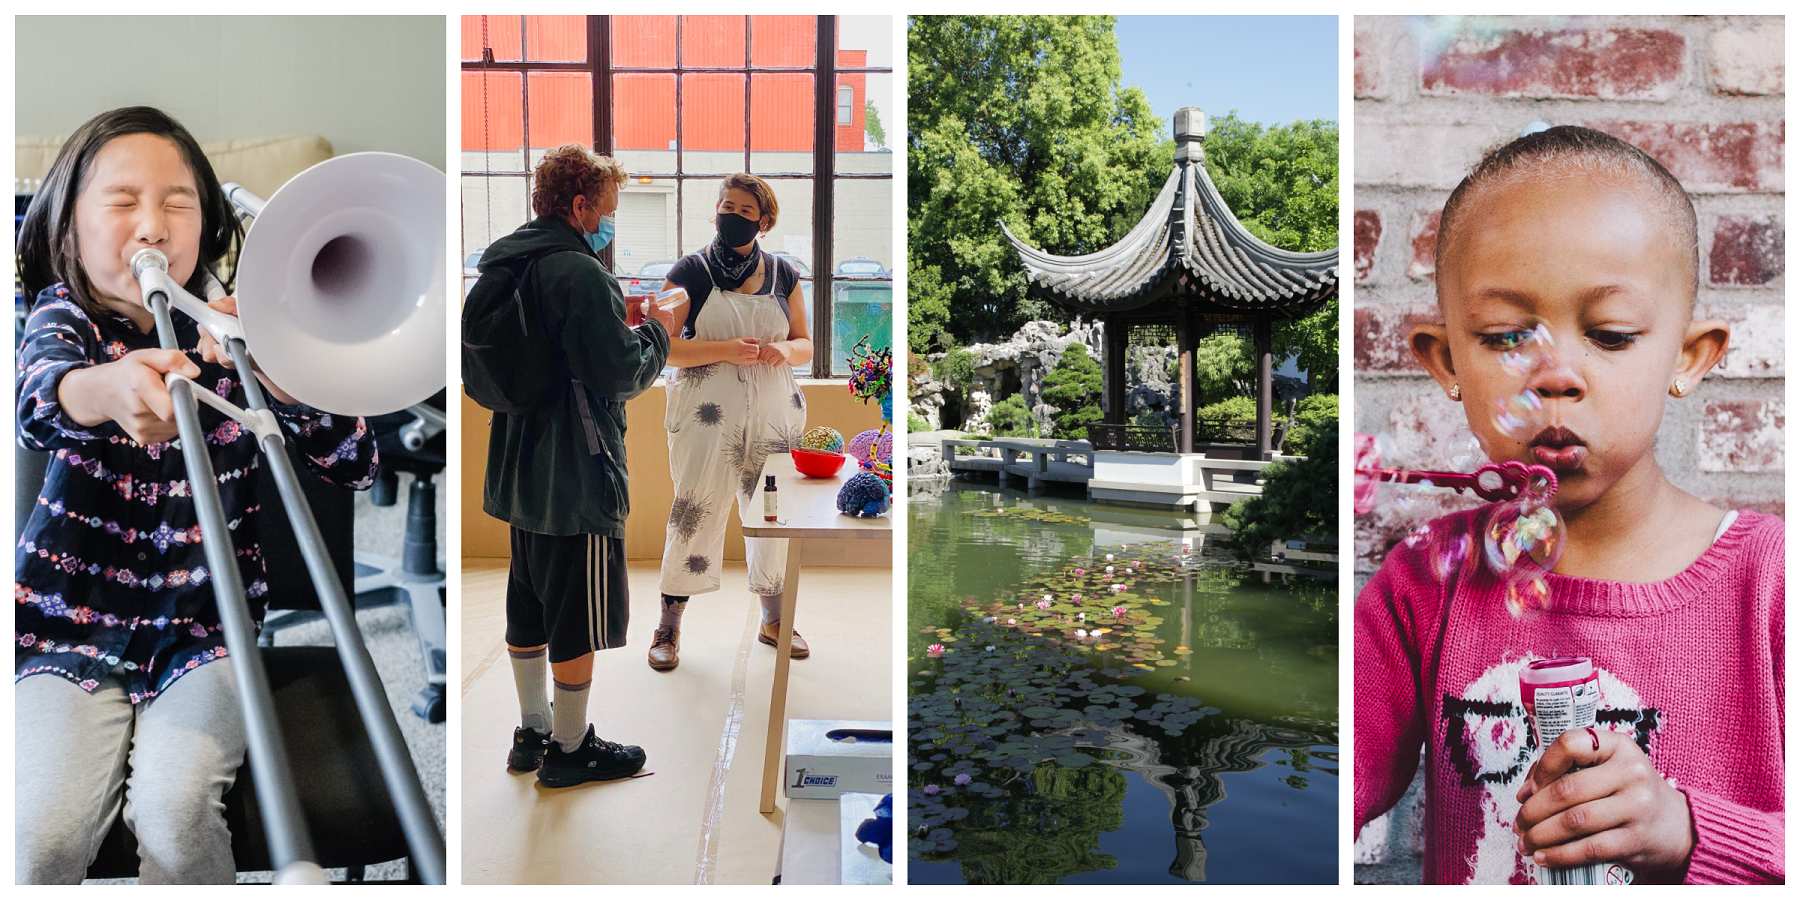 Image 1: a young girl blows into an instrument. Image 2: a man and a woman have a conversation inside an artist studio. Image 3: a pagoda in a Japanese garden. Image 4: a young child wearing a pink sweater blows bubbles toward the camera. 